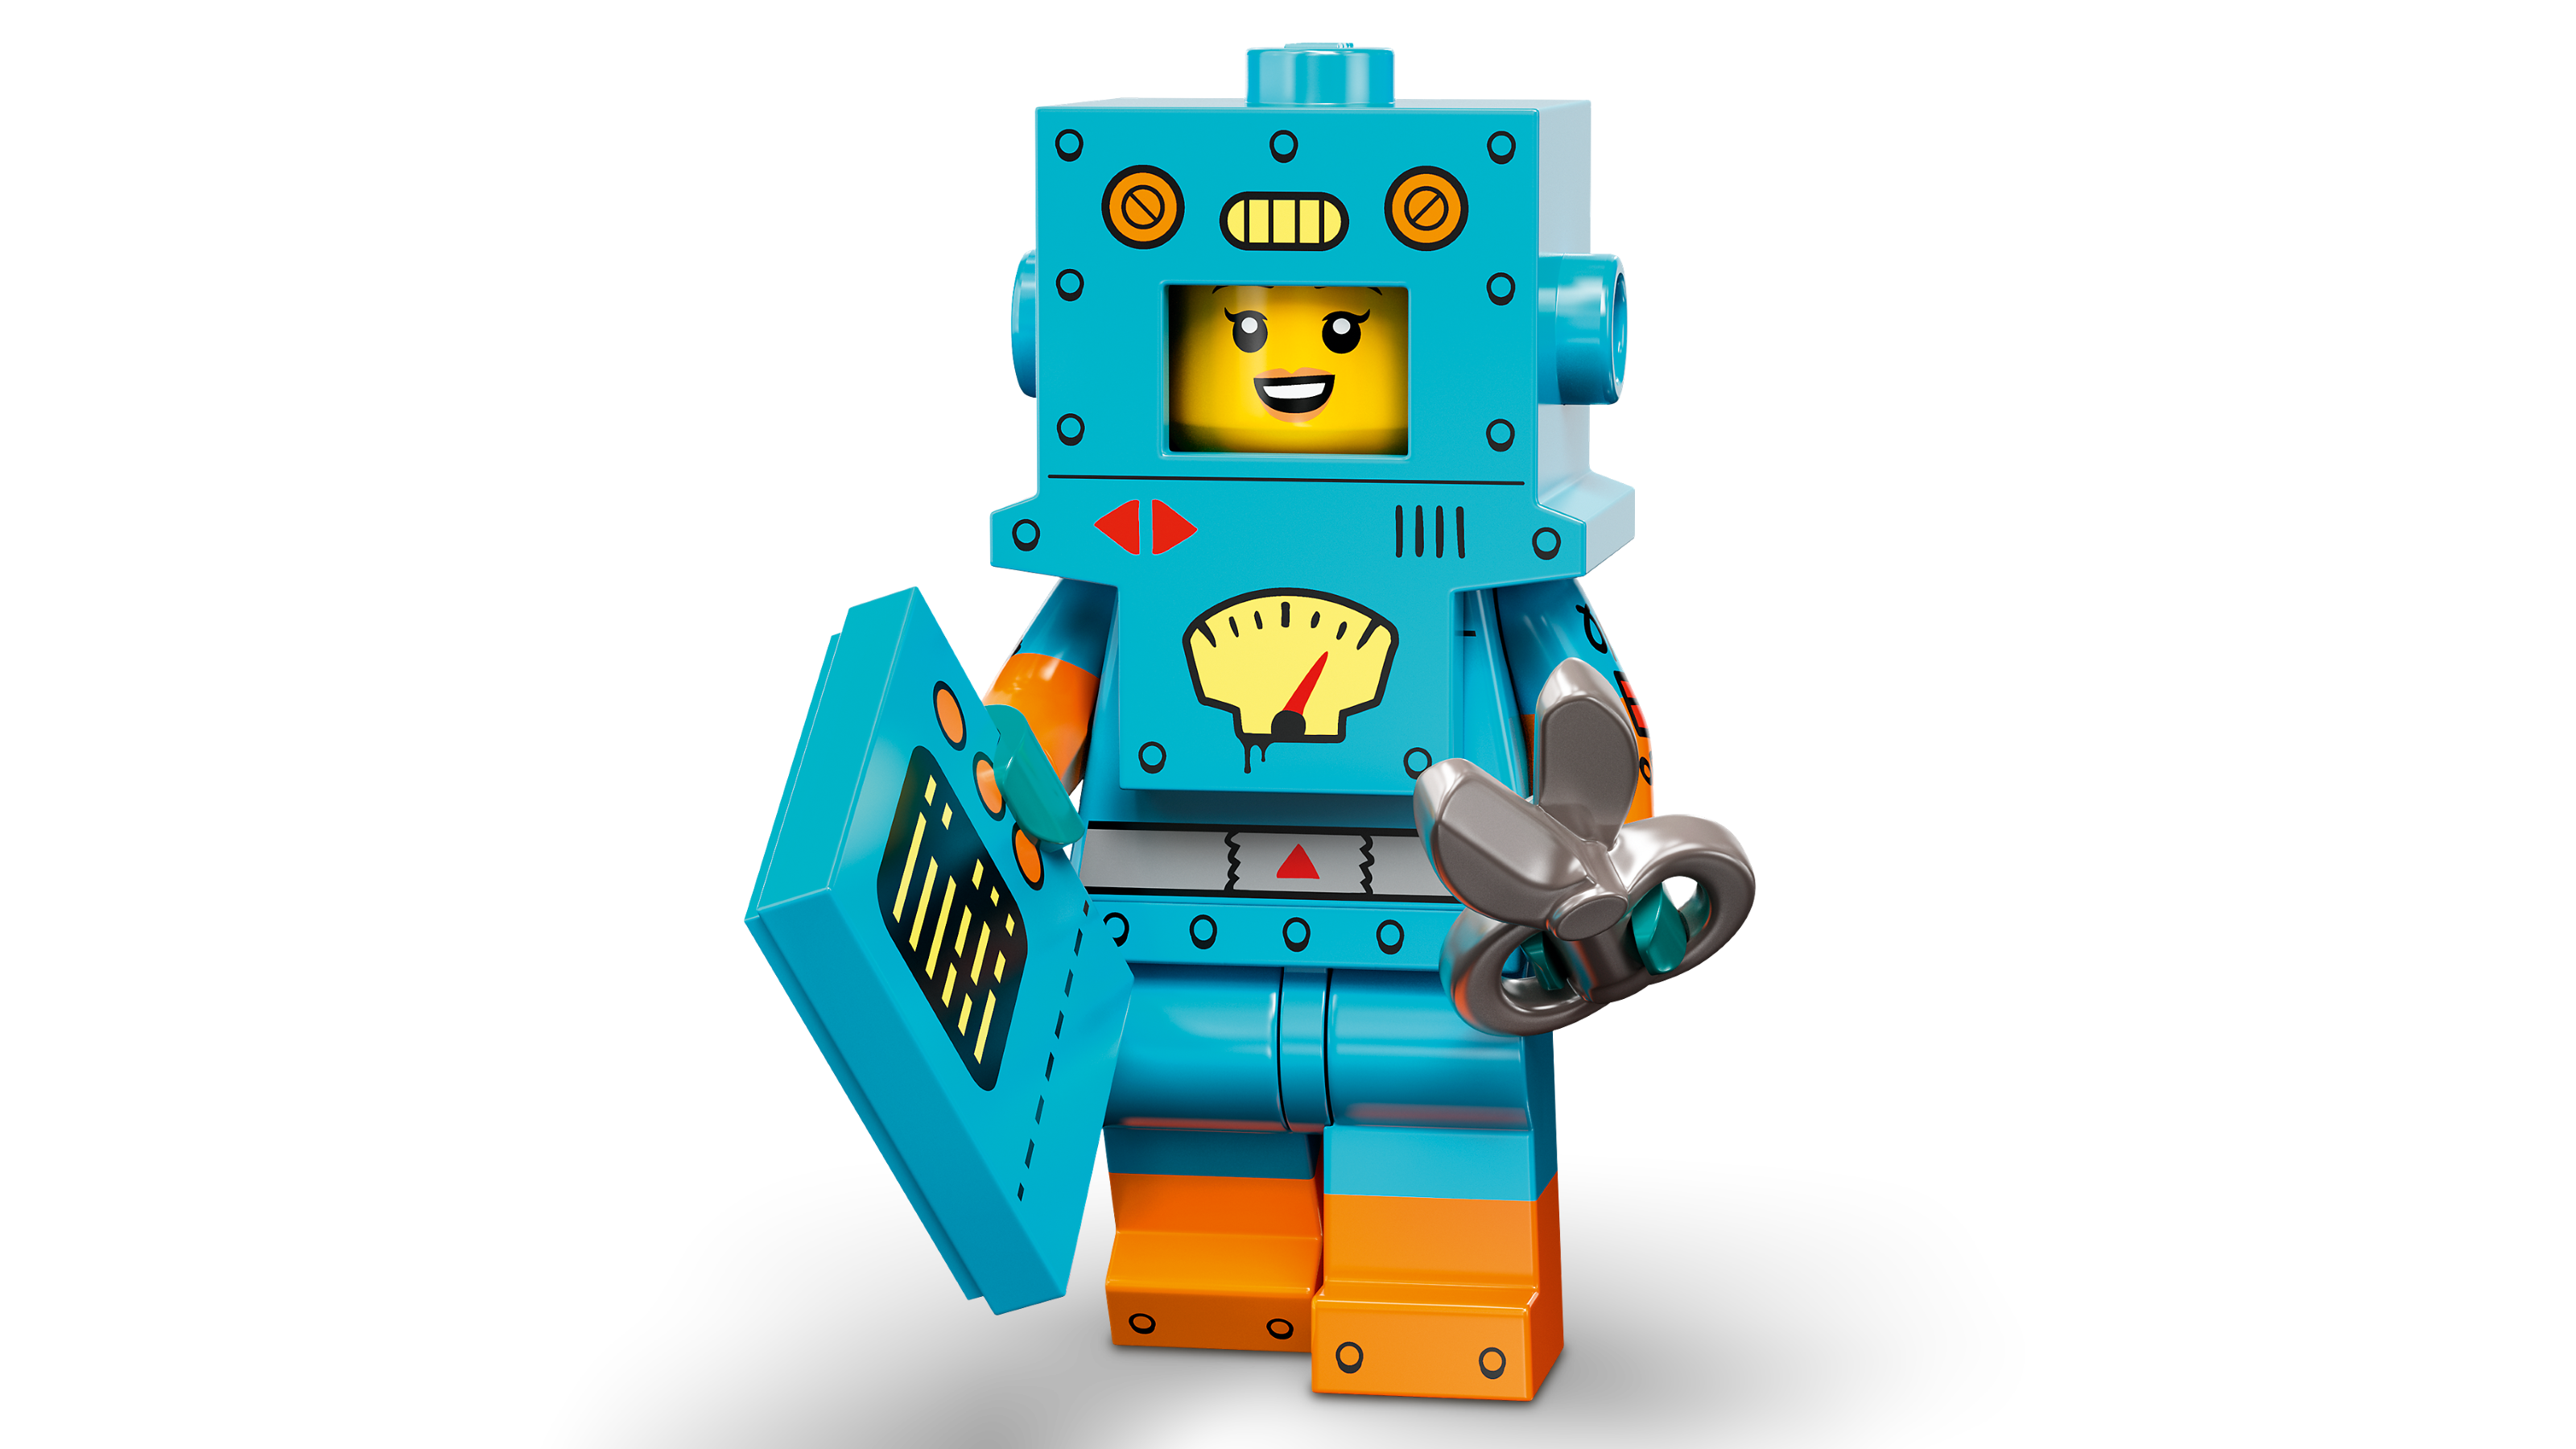 Series 23 71034 | Minifigures | Buy online at the Official LEGO® Shop US